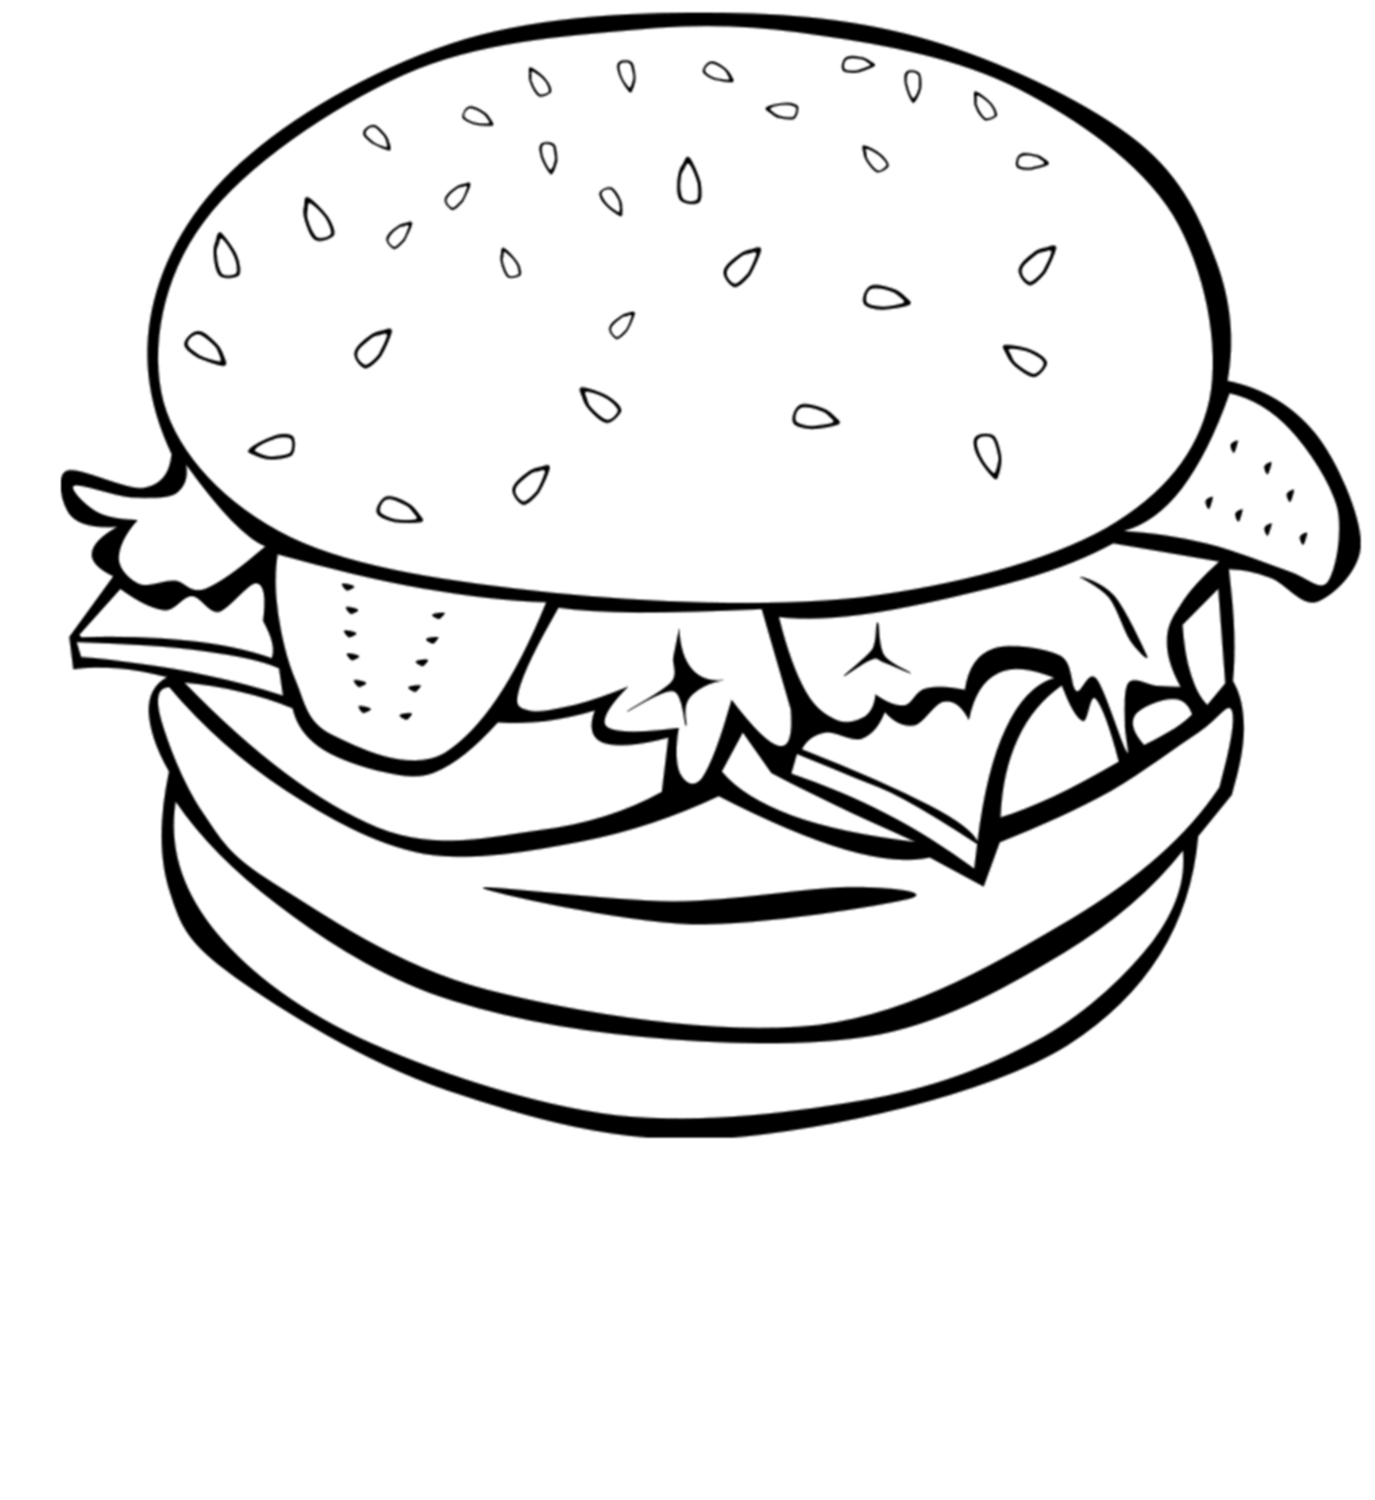 Burgers clipart free download clip art on jpg 2